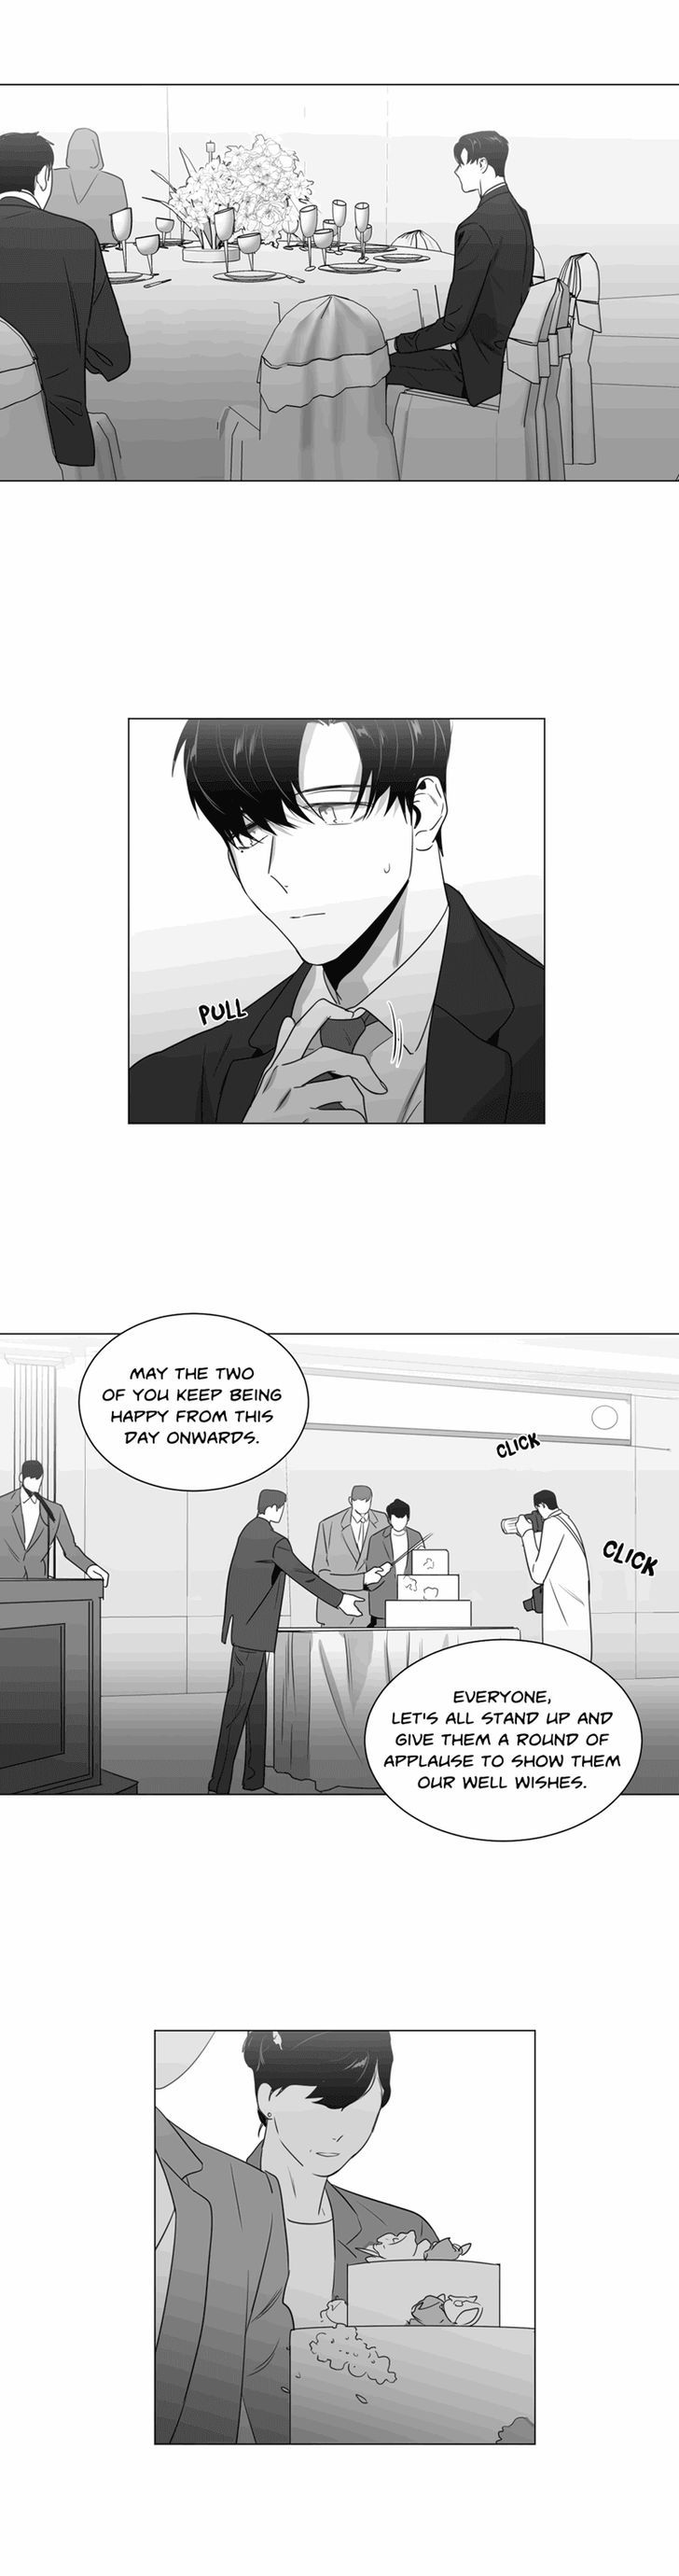 Lover Boy (Lezhin) Chapter 031 page 12